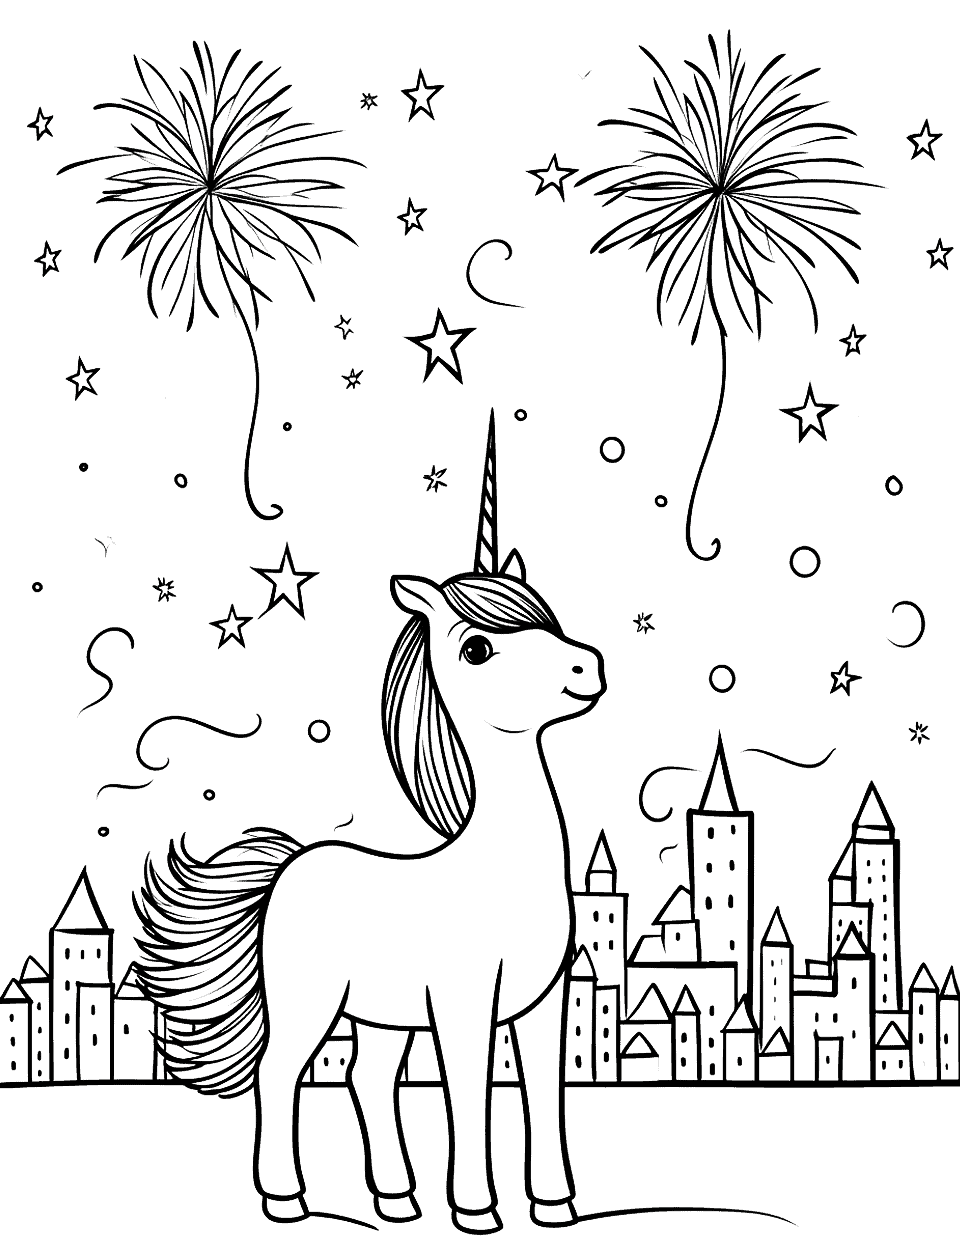 Unicorn and Fireworks Coloring Page - A unicorn watching a spectacular fireworks display in the night sky.